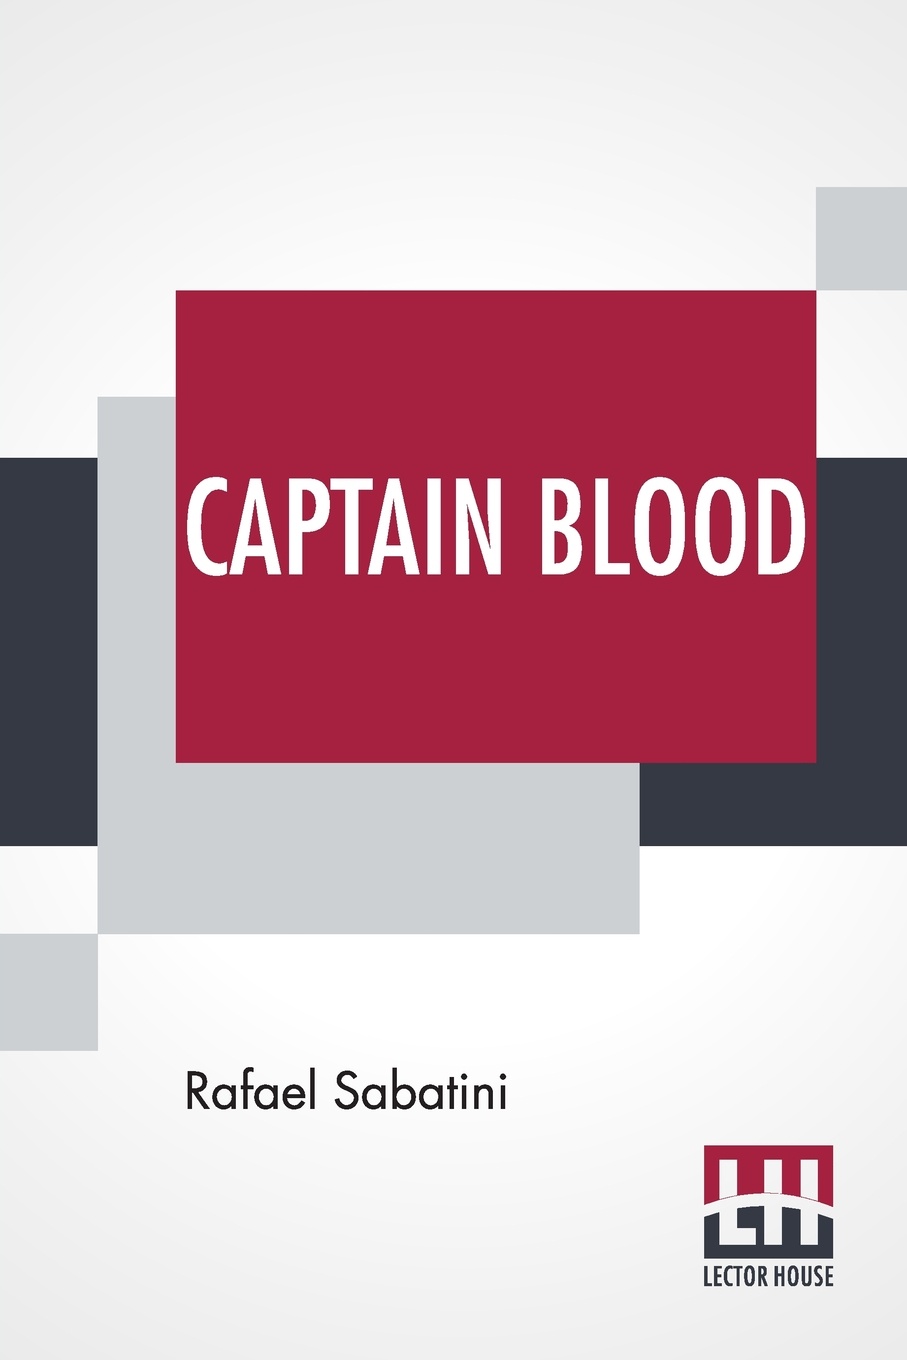 Captain Blood. His Odyssey